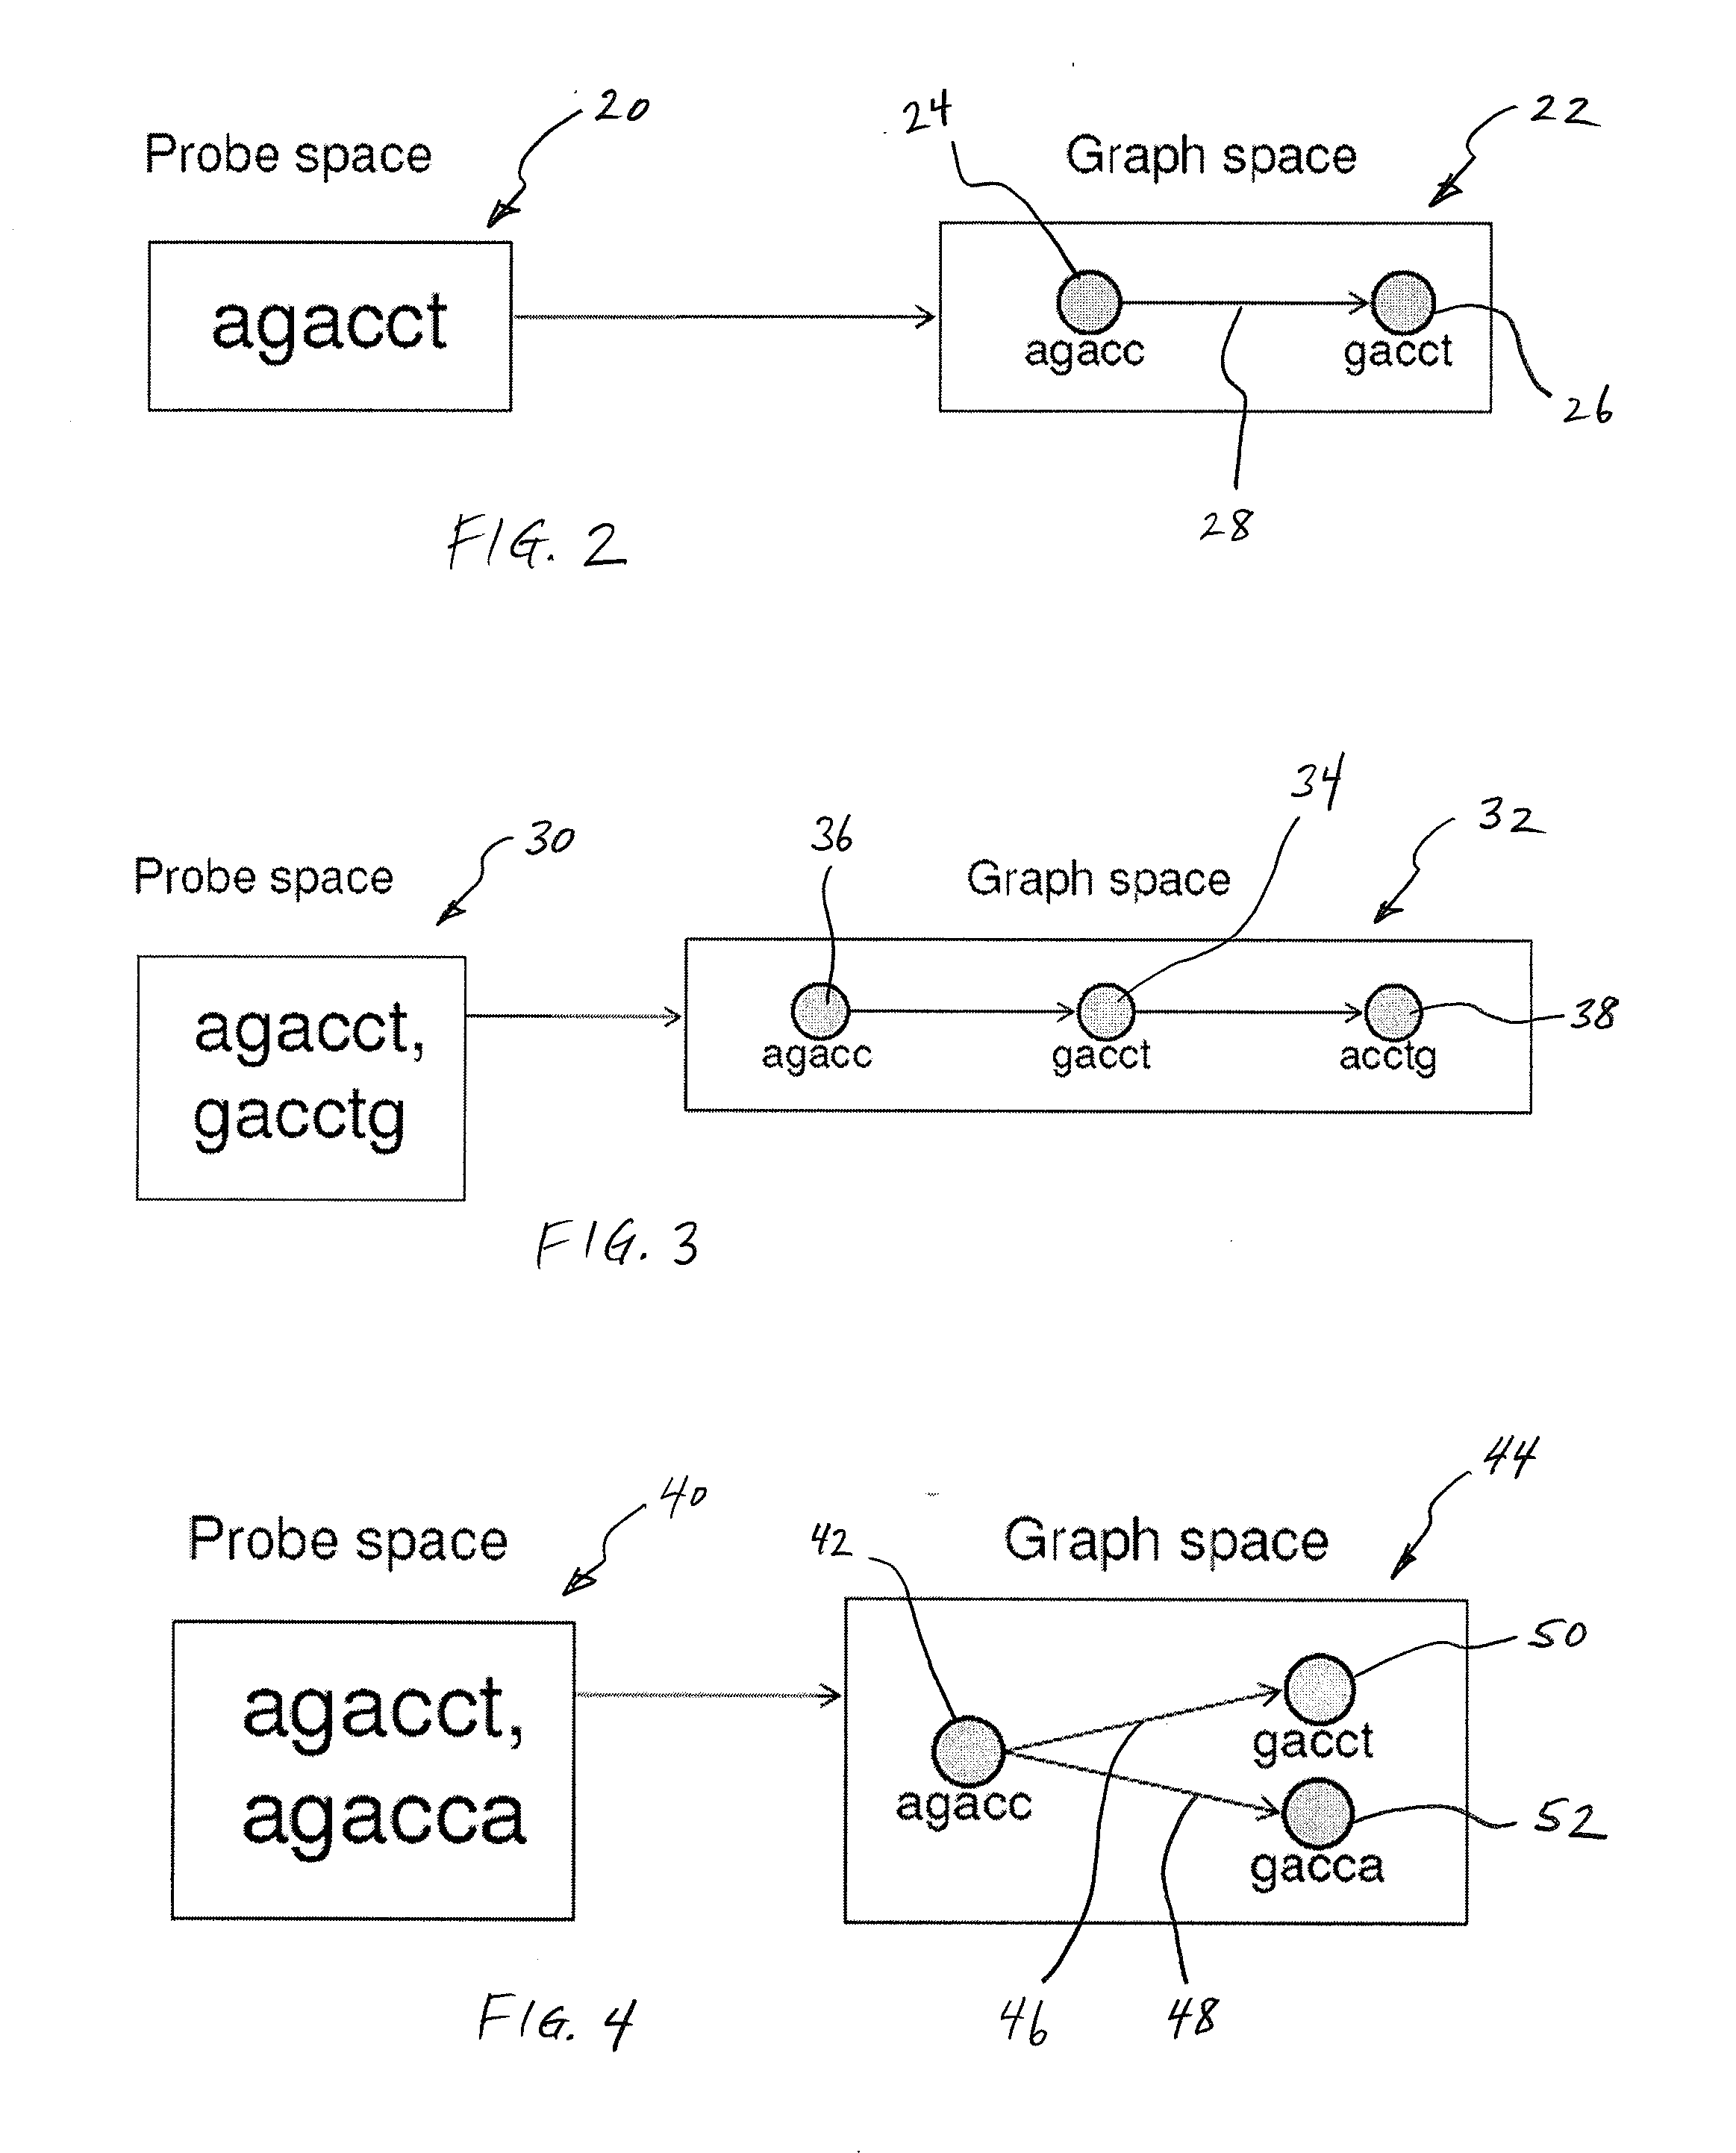 Methods for Sequencing a Biomolecule by Detecting Relative Positions of Hybridized Probes